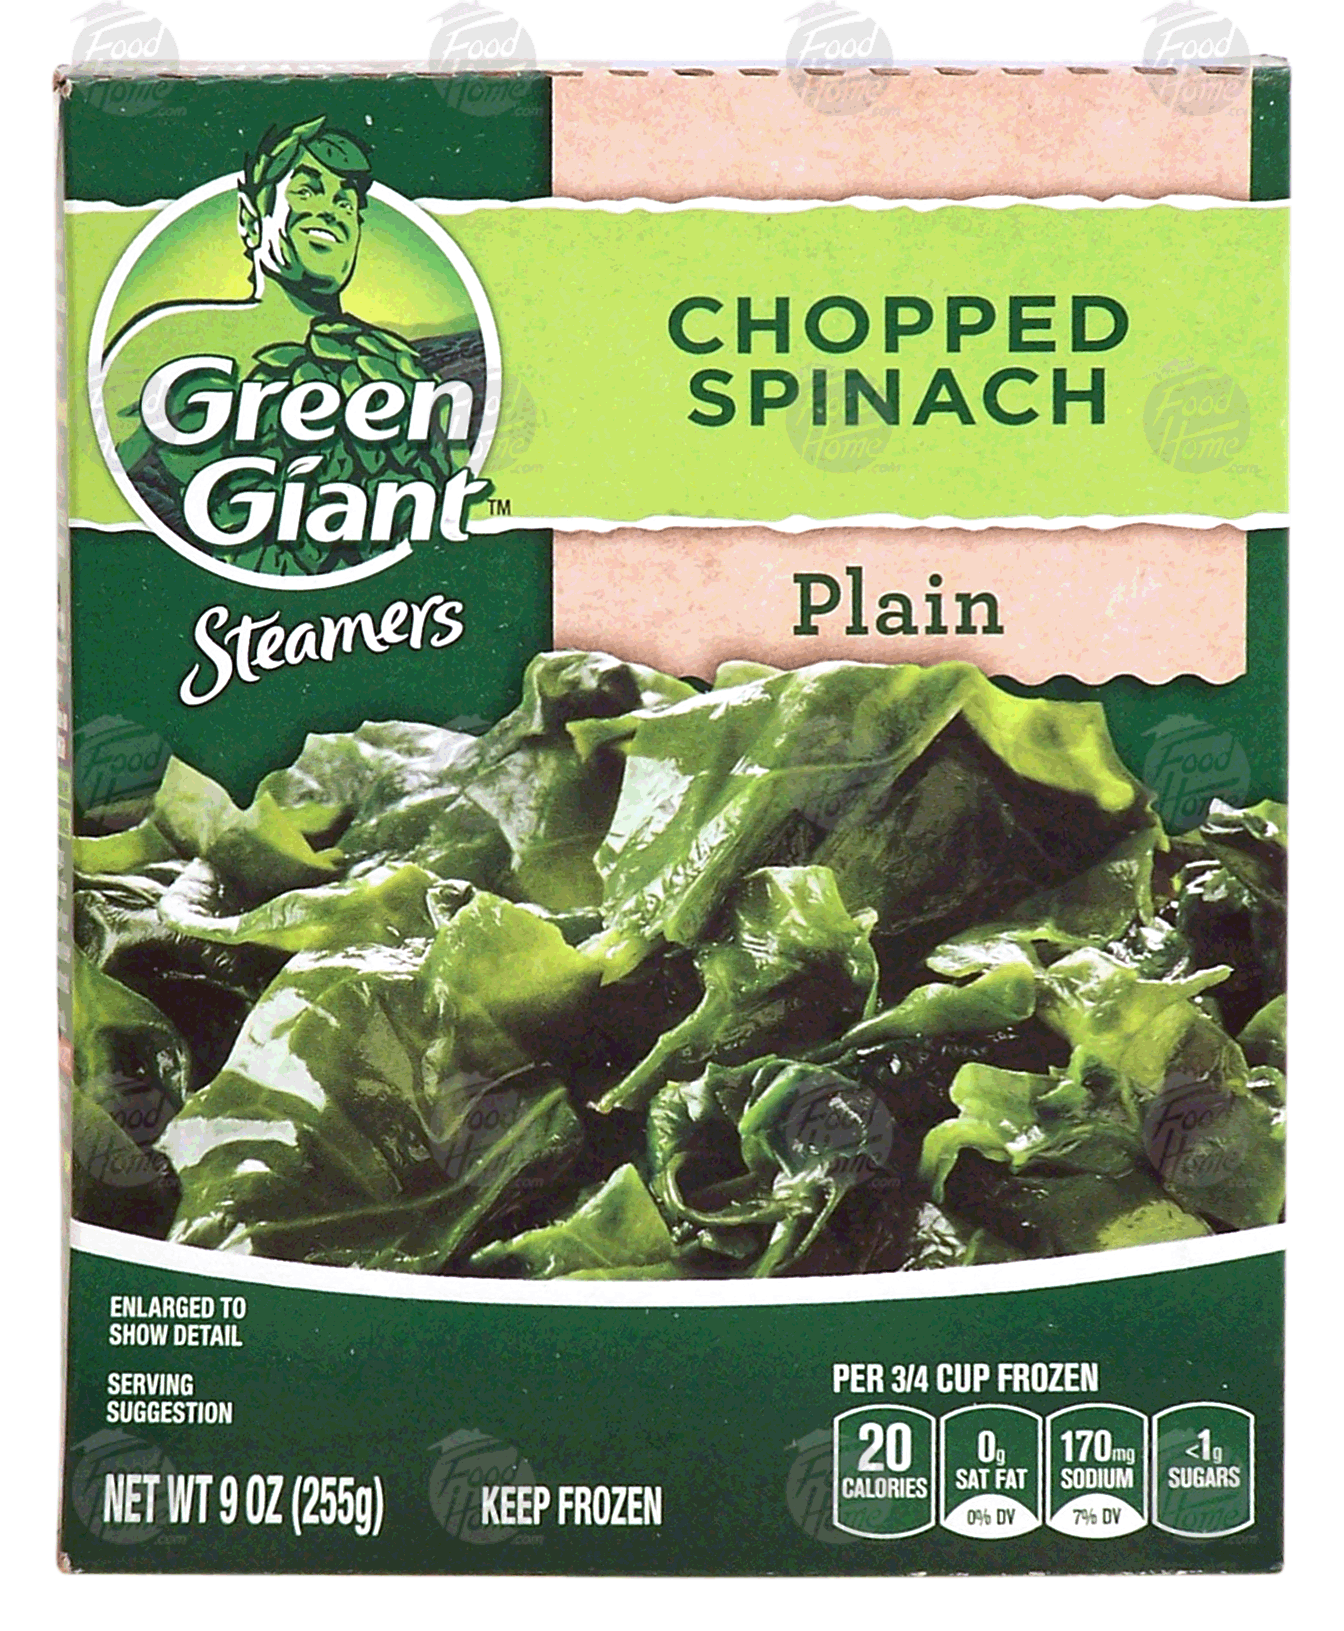 Green Giant Steamers chopped spinach, plain Full-Size Picture